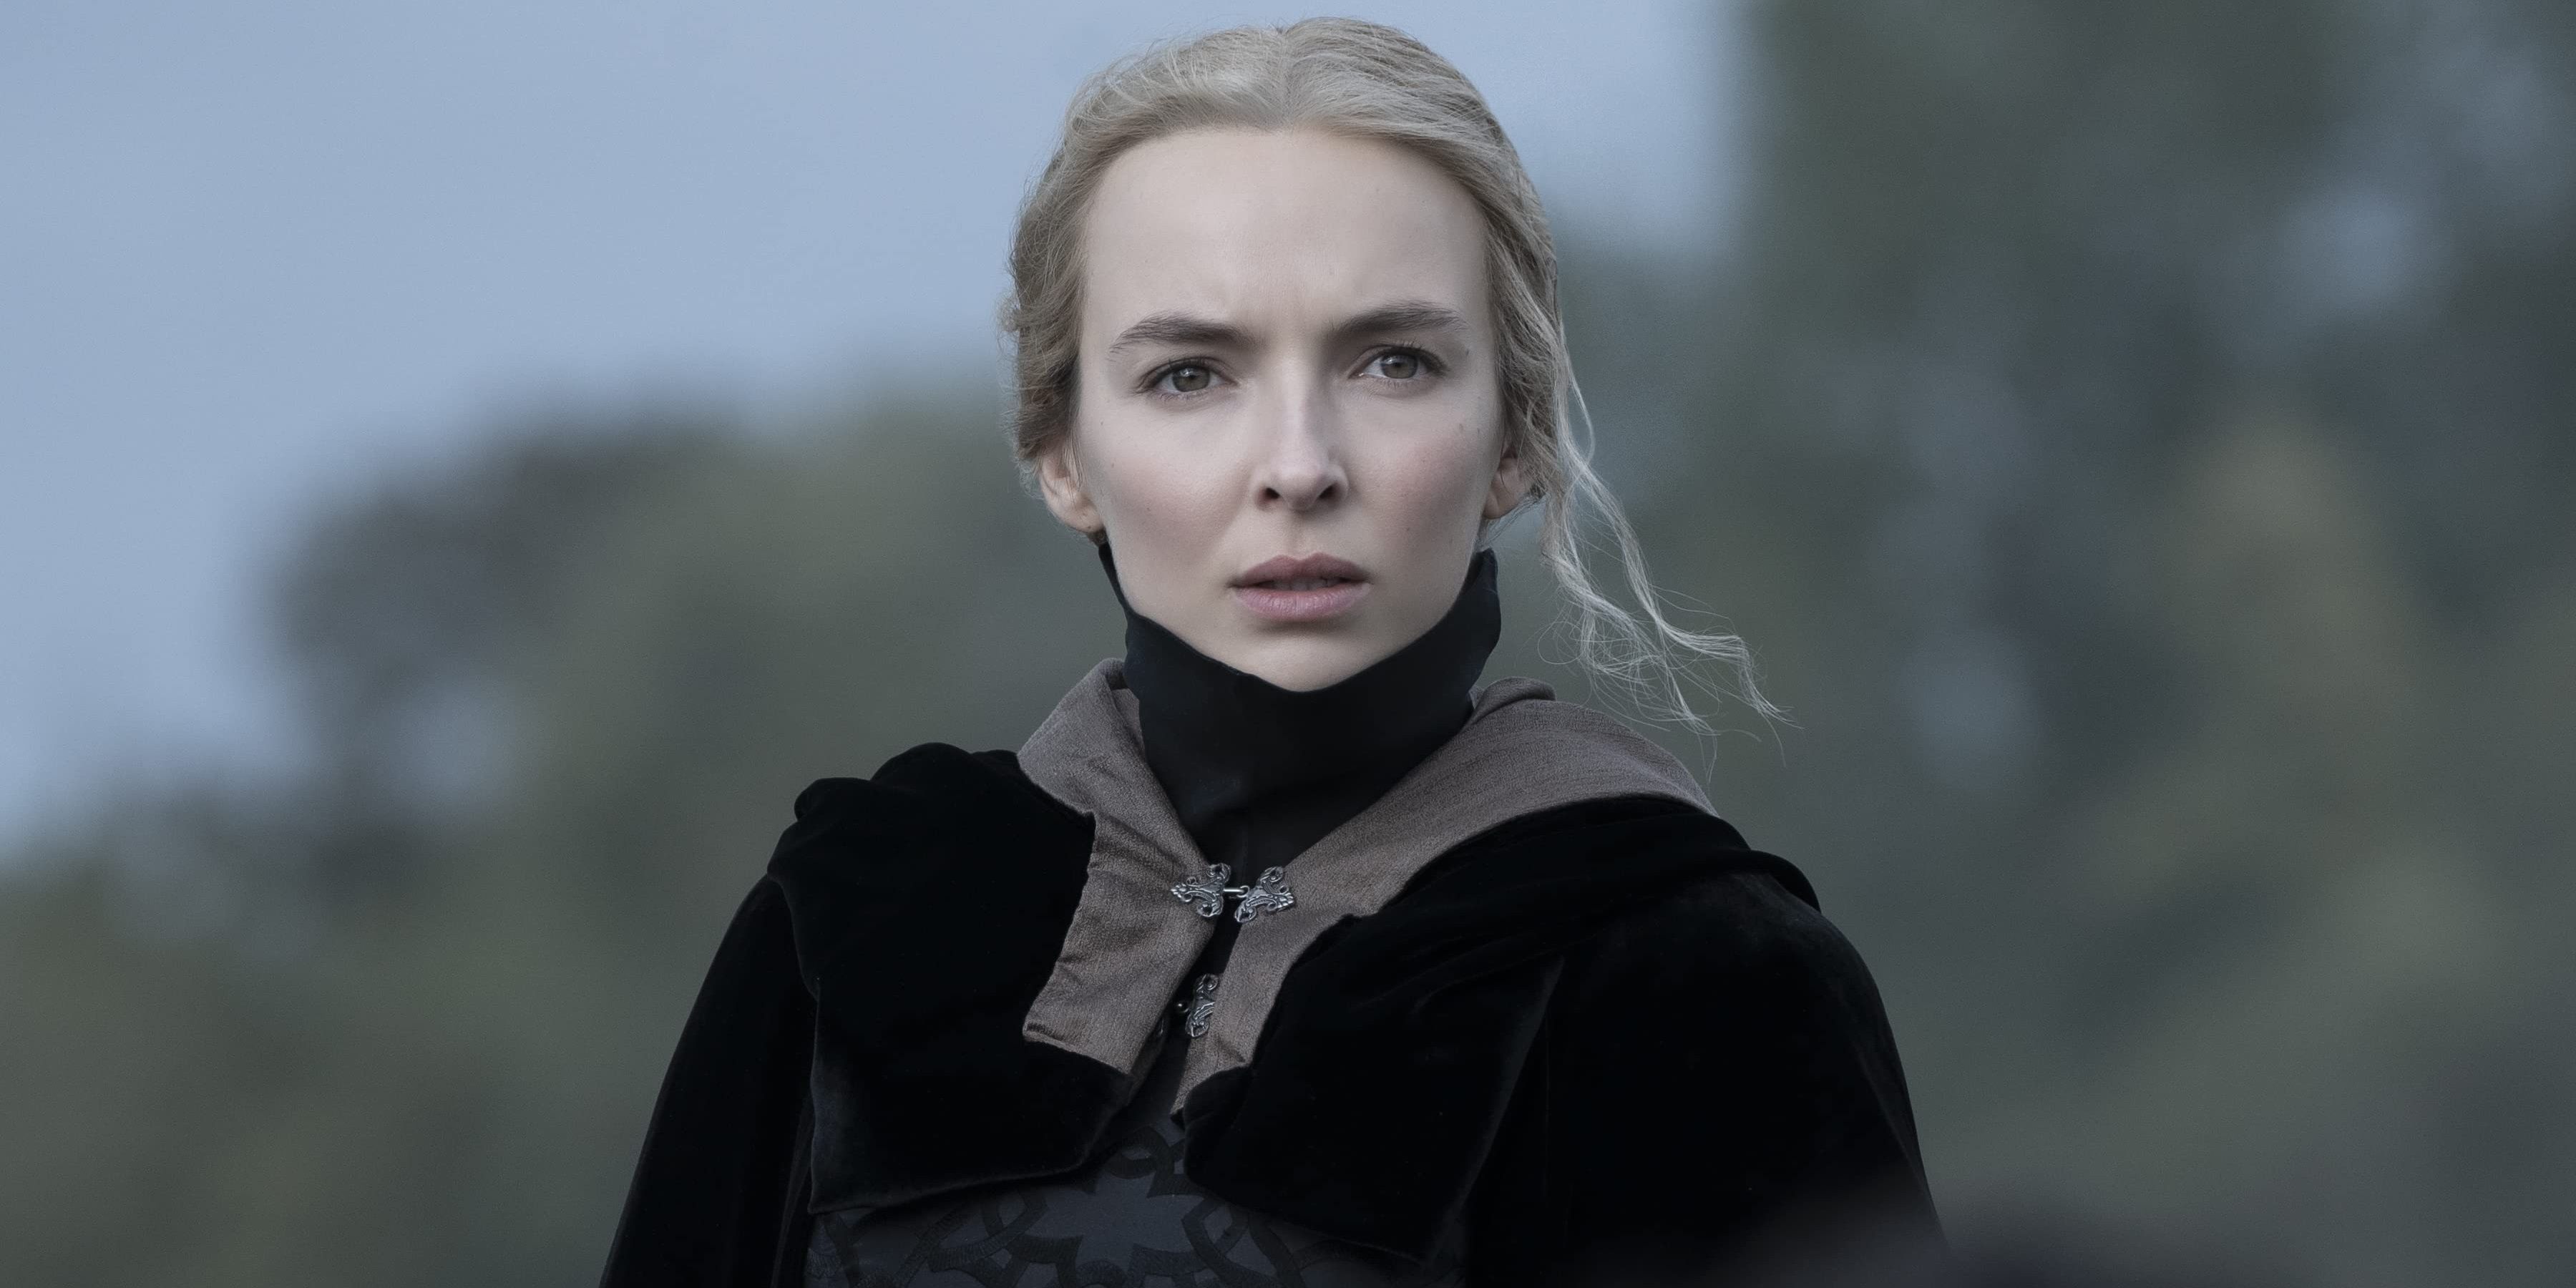 Jodie Comer as Marguerite in The Last Duel